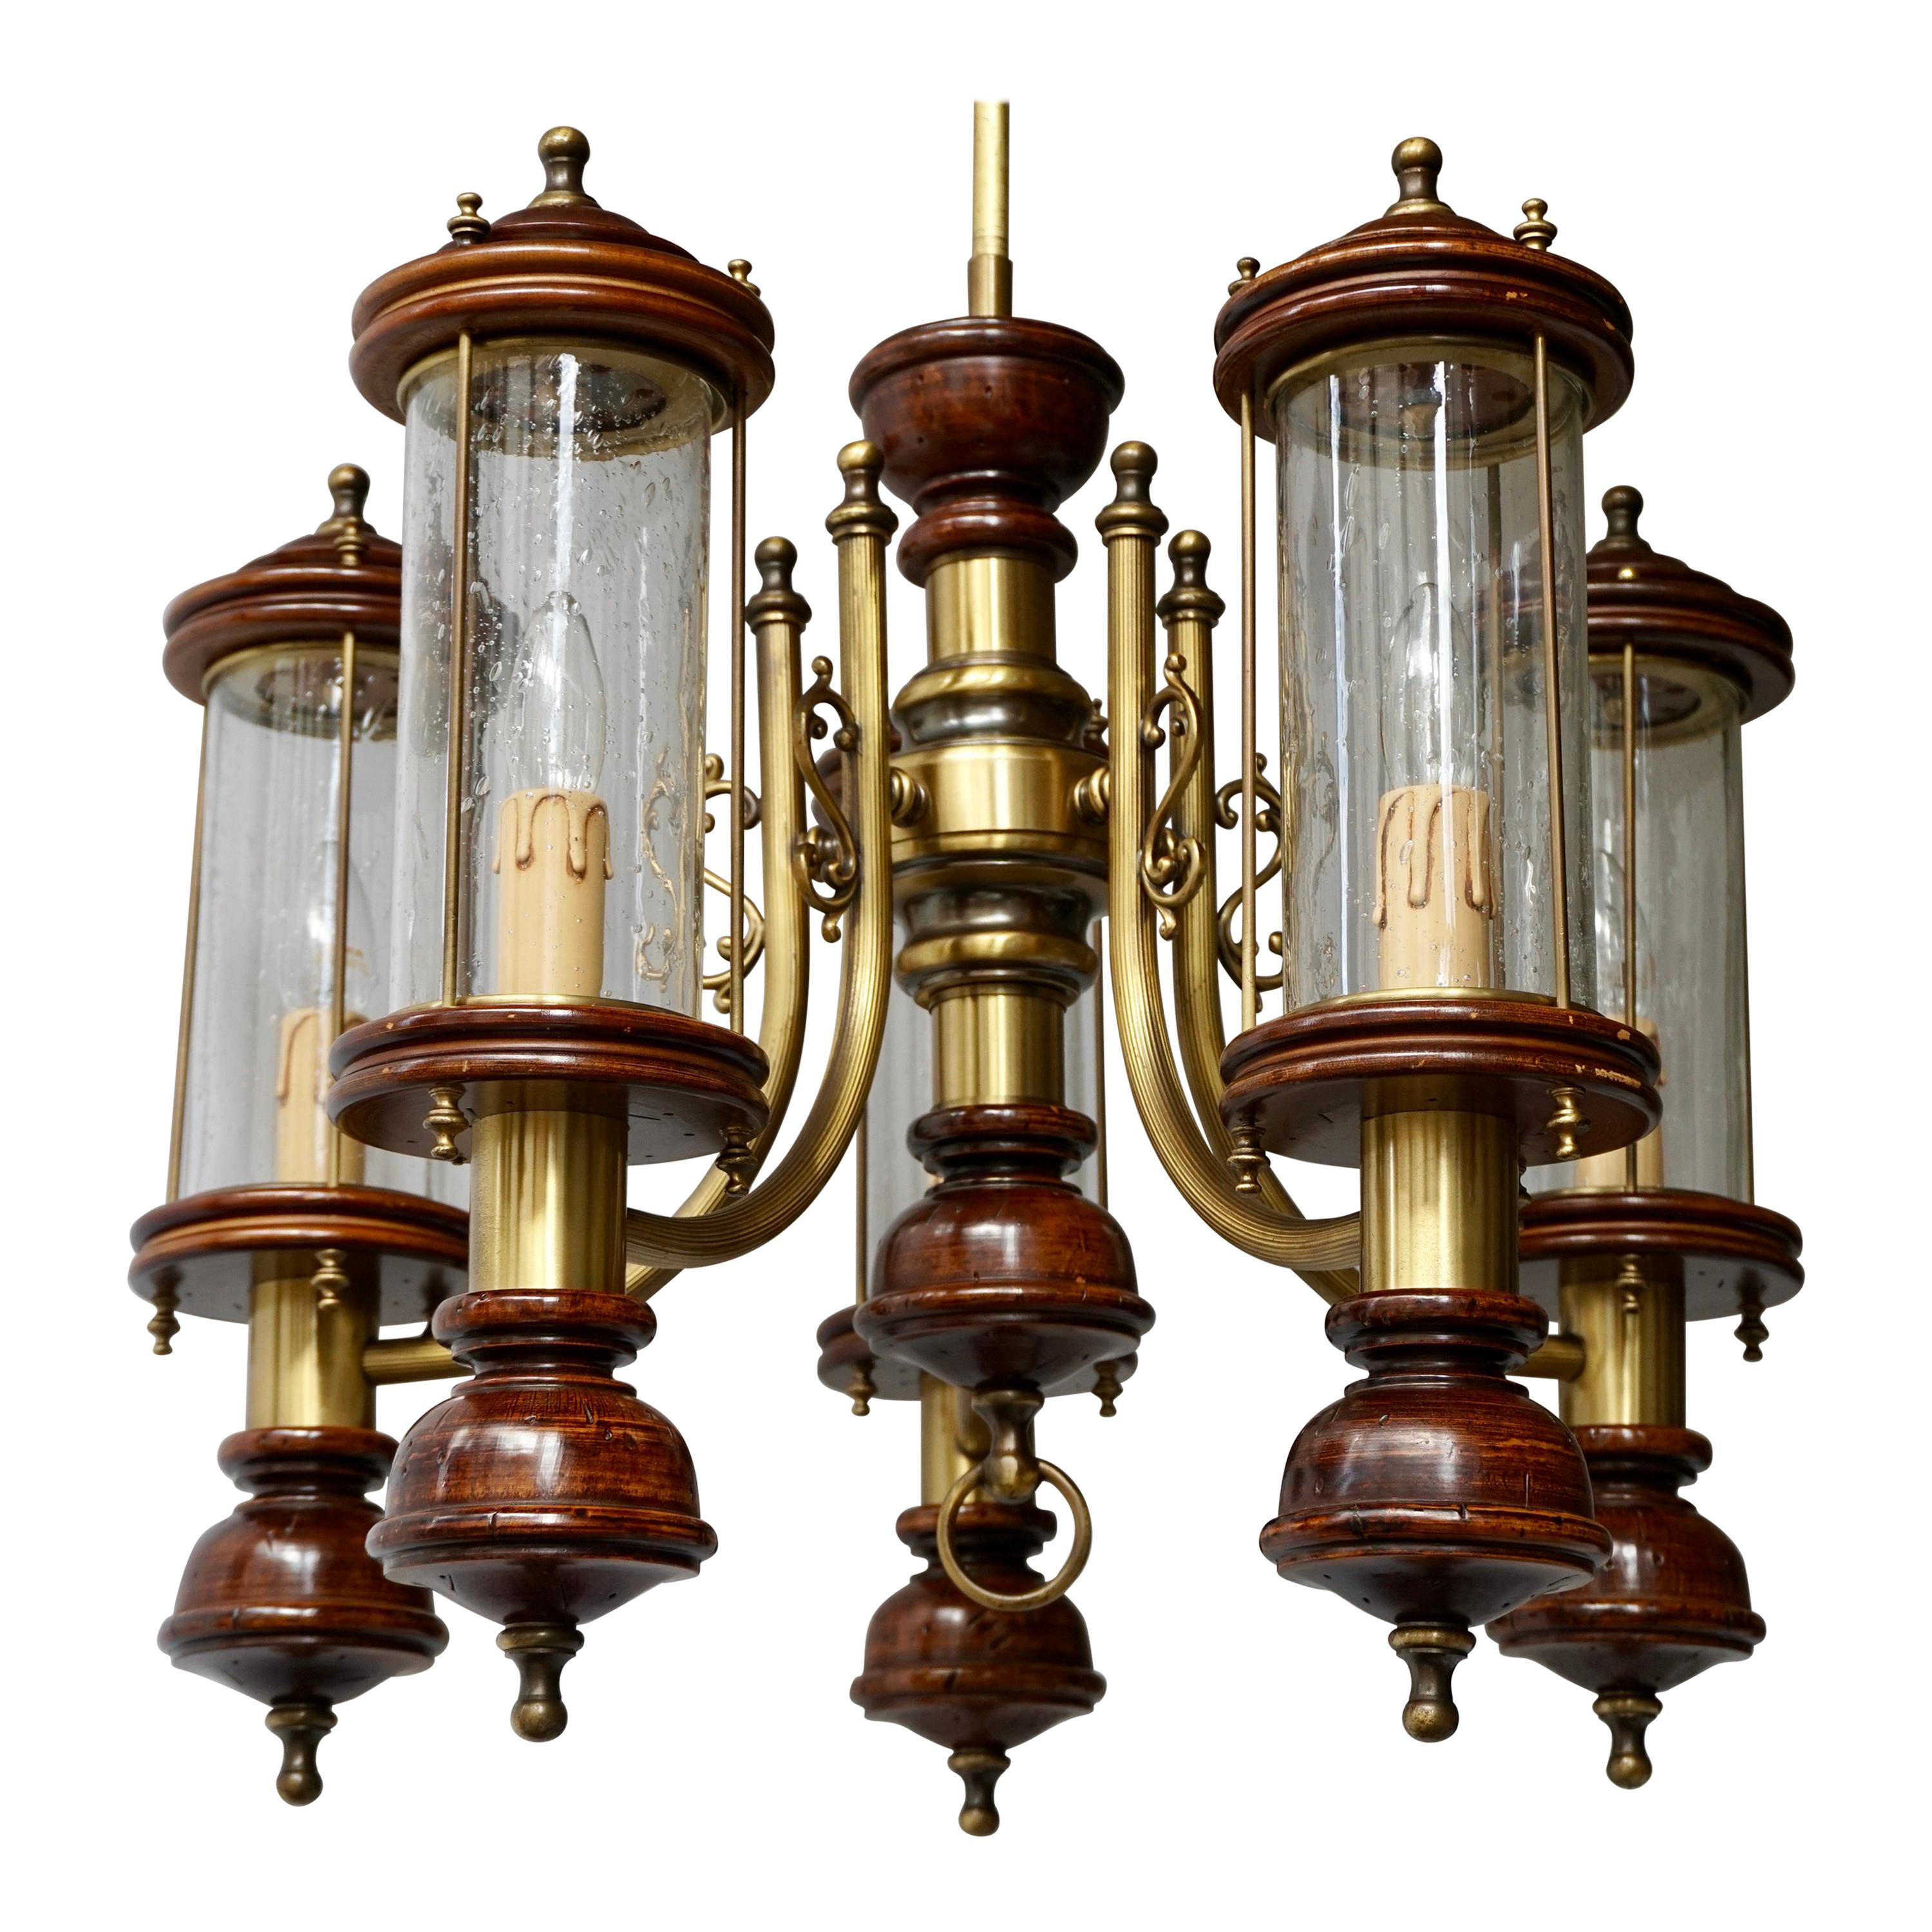 Chandelier is Glass, Brass and Wood For Sale